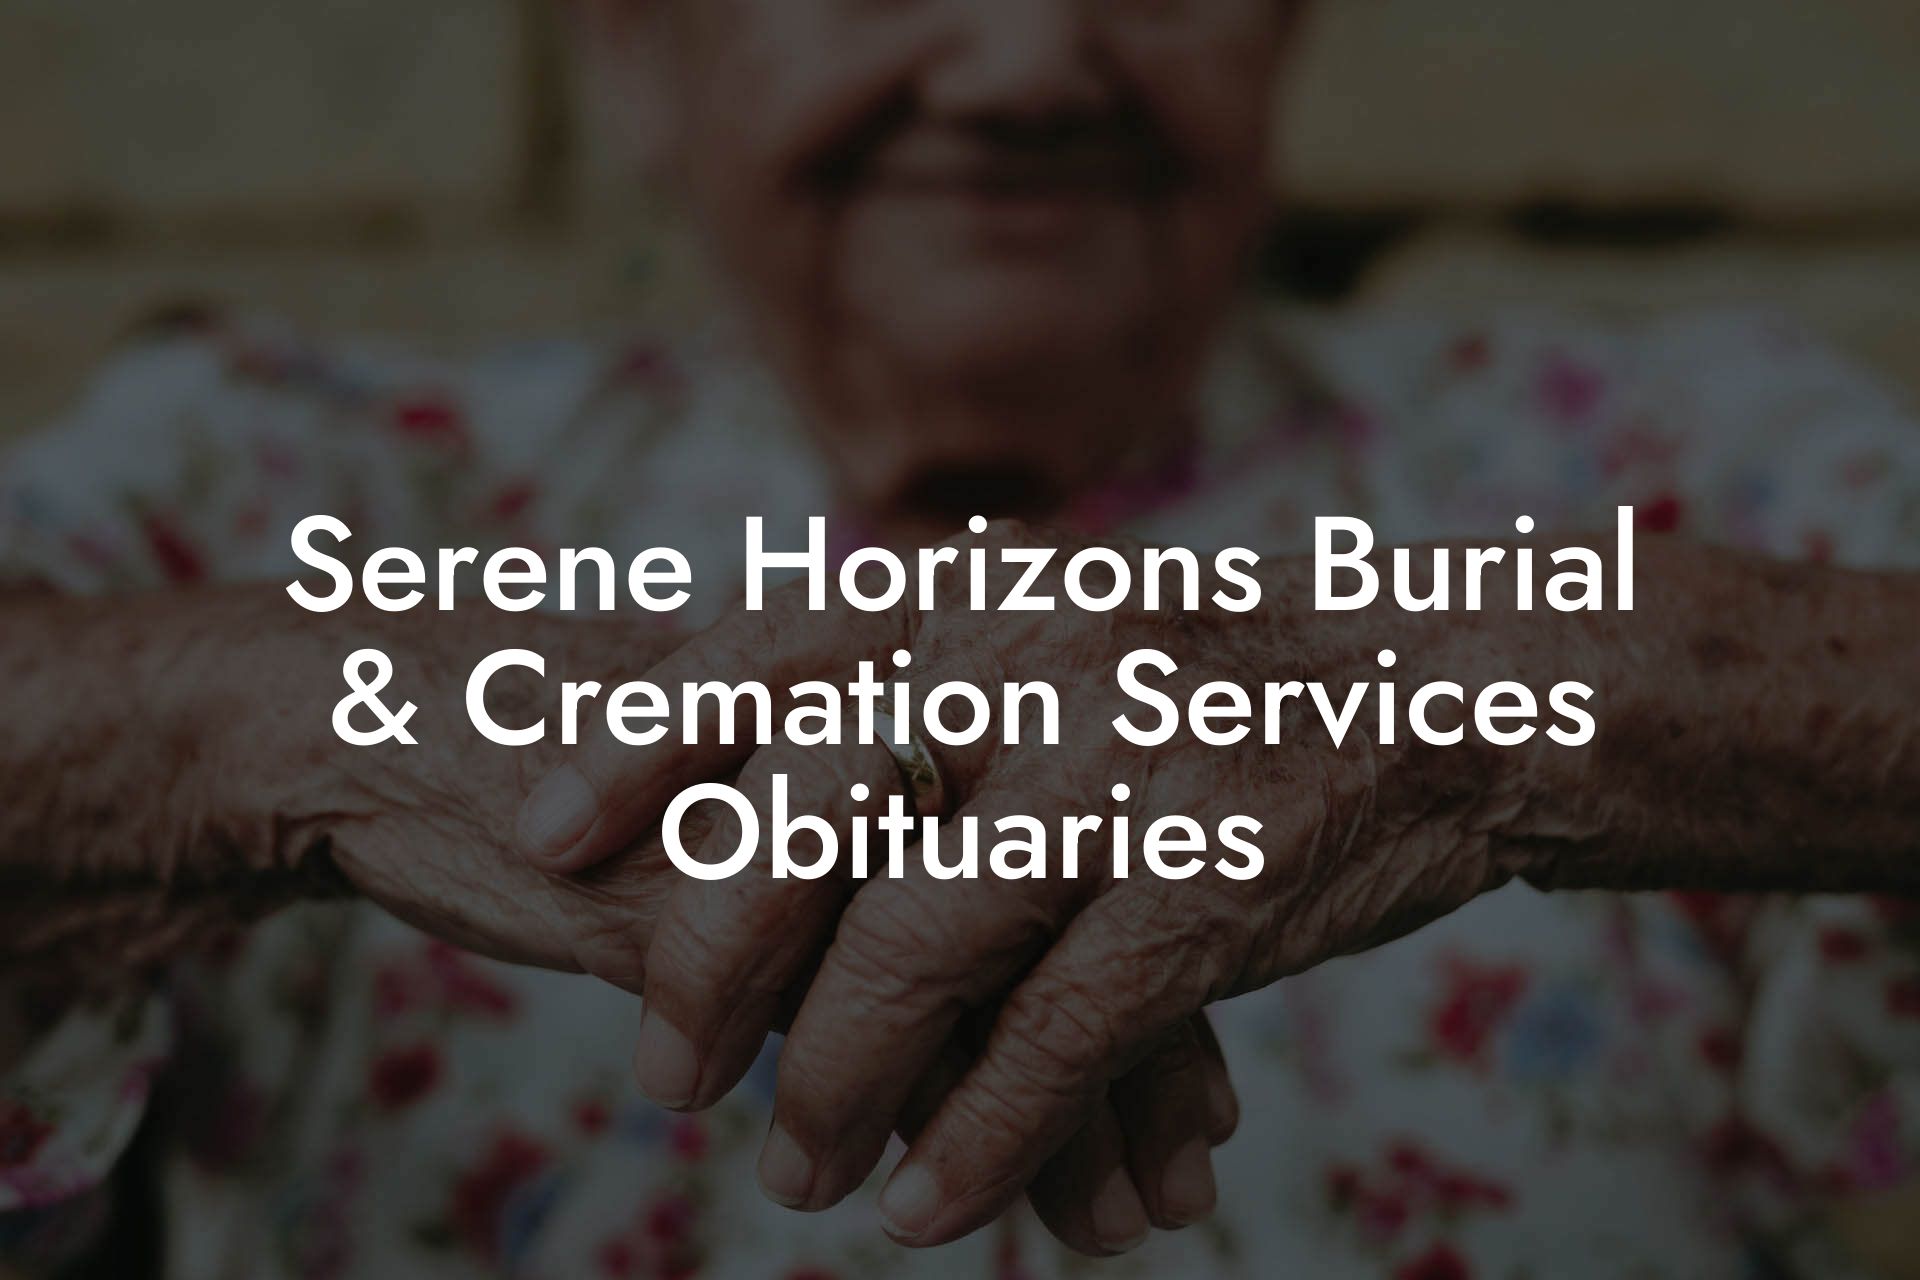 Serene Horizons Burial & Cremation Services Obituaries